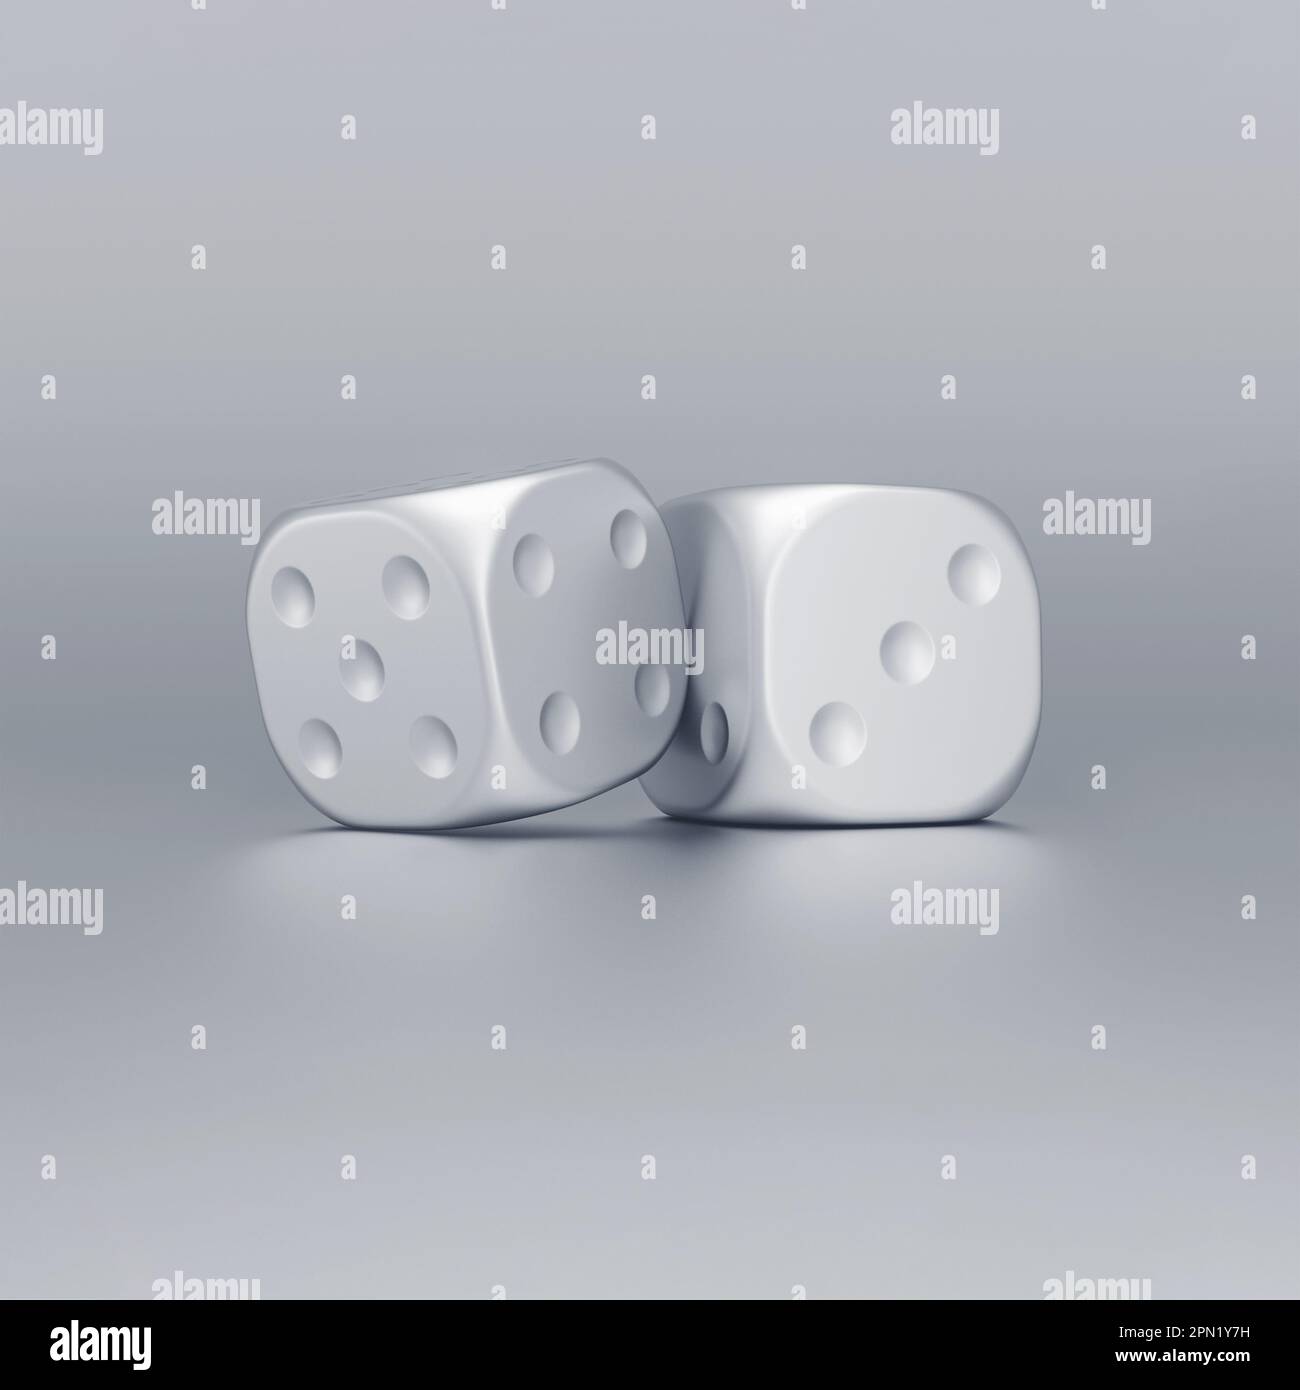 Silver dice on on grey background. Lucky game or random concept. 3d rendering. Stock Photo